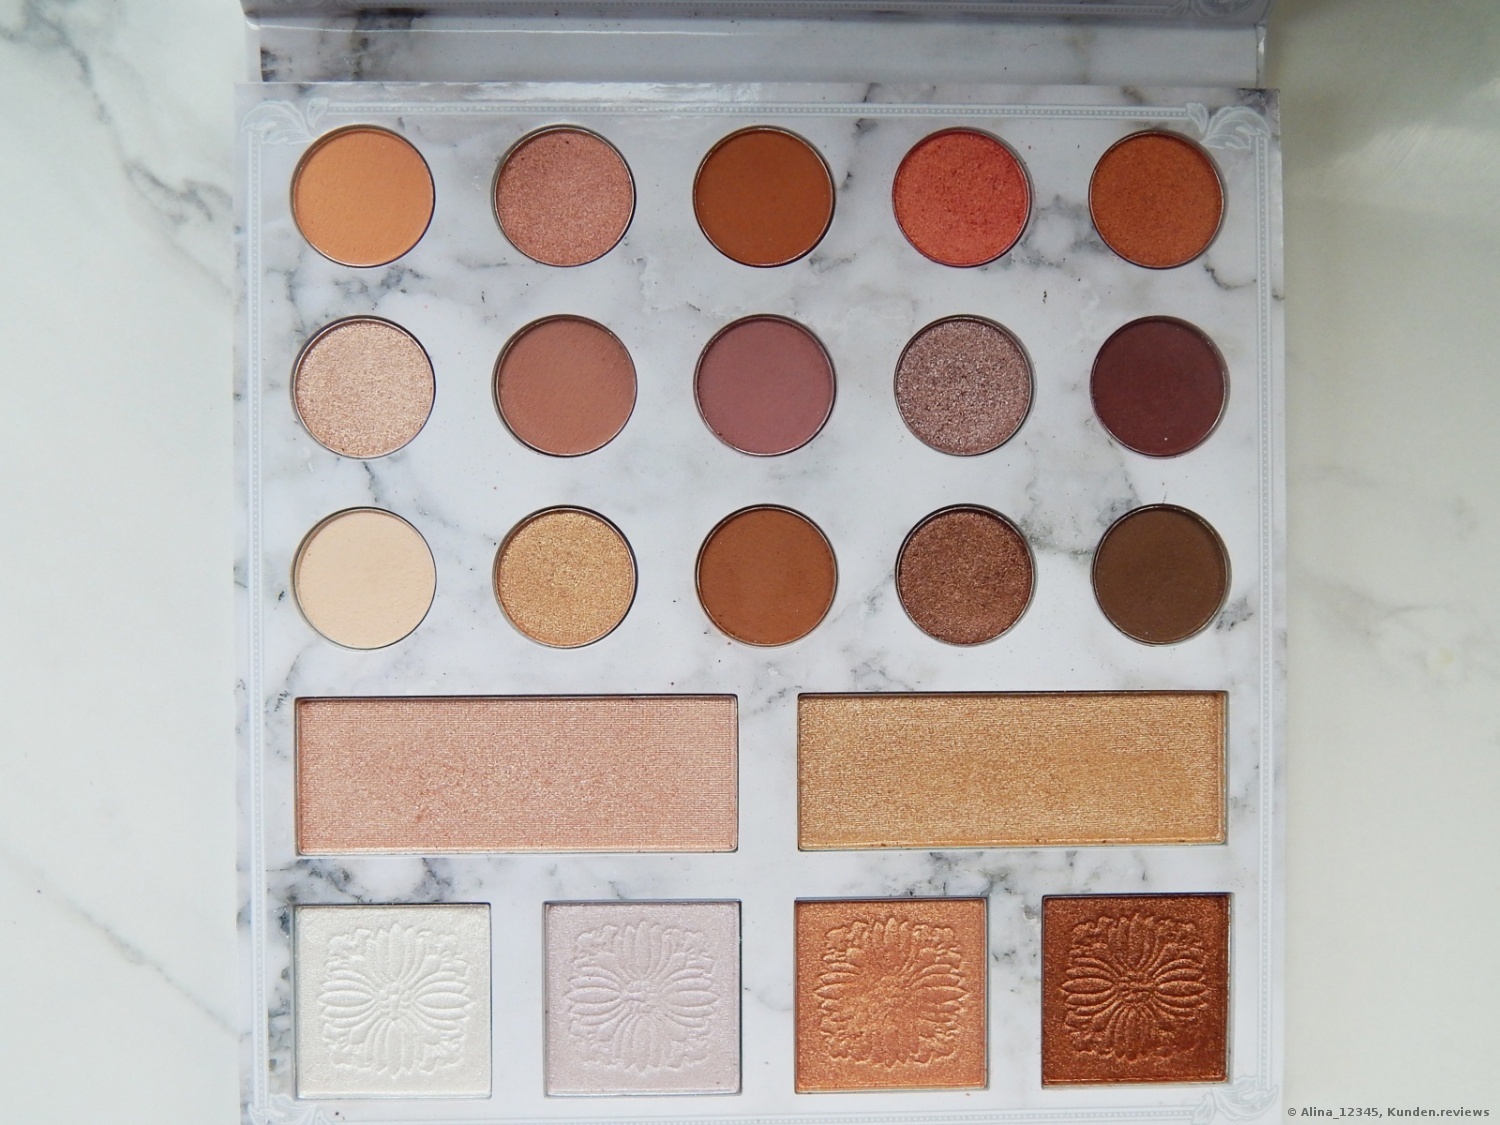 BH Cosmetics Carli Bybel Deluxe Edition - 21 Color Eyeshadow & Highlighter Palette Foto